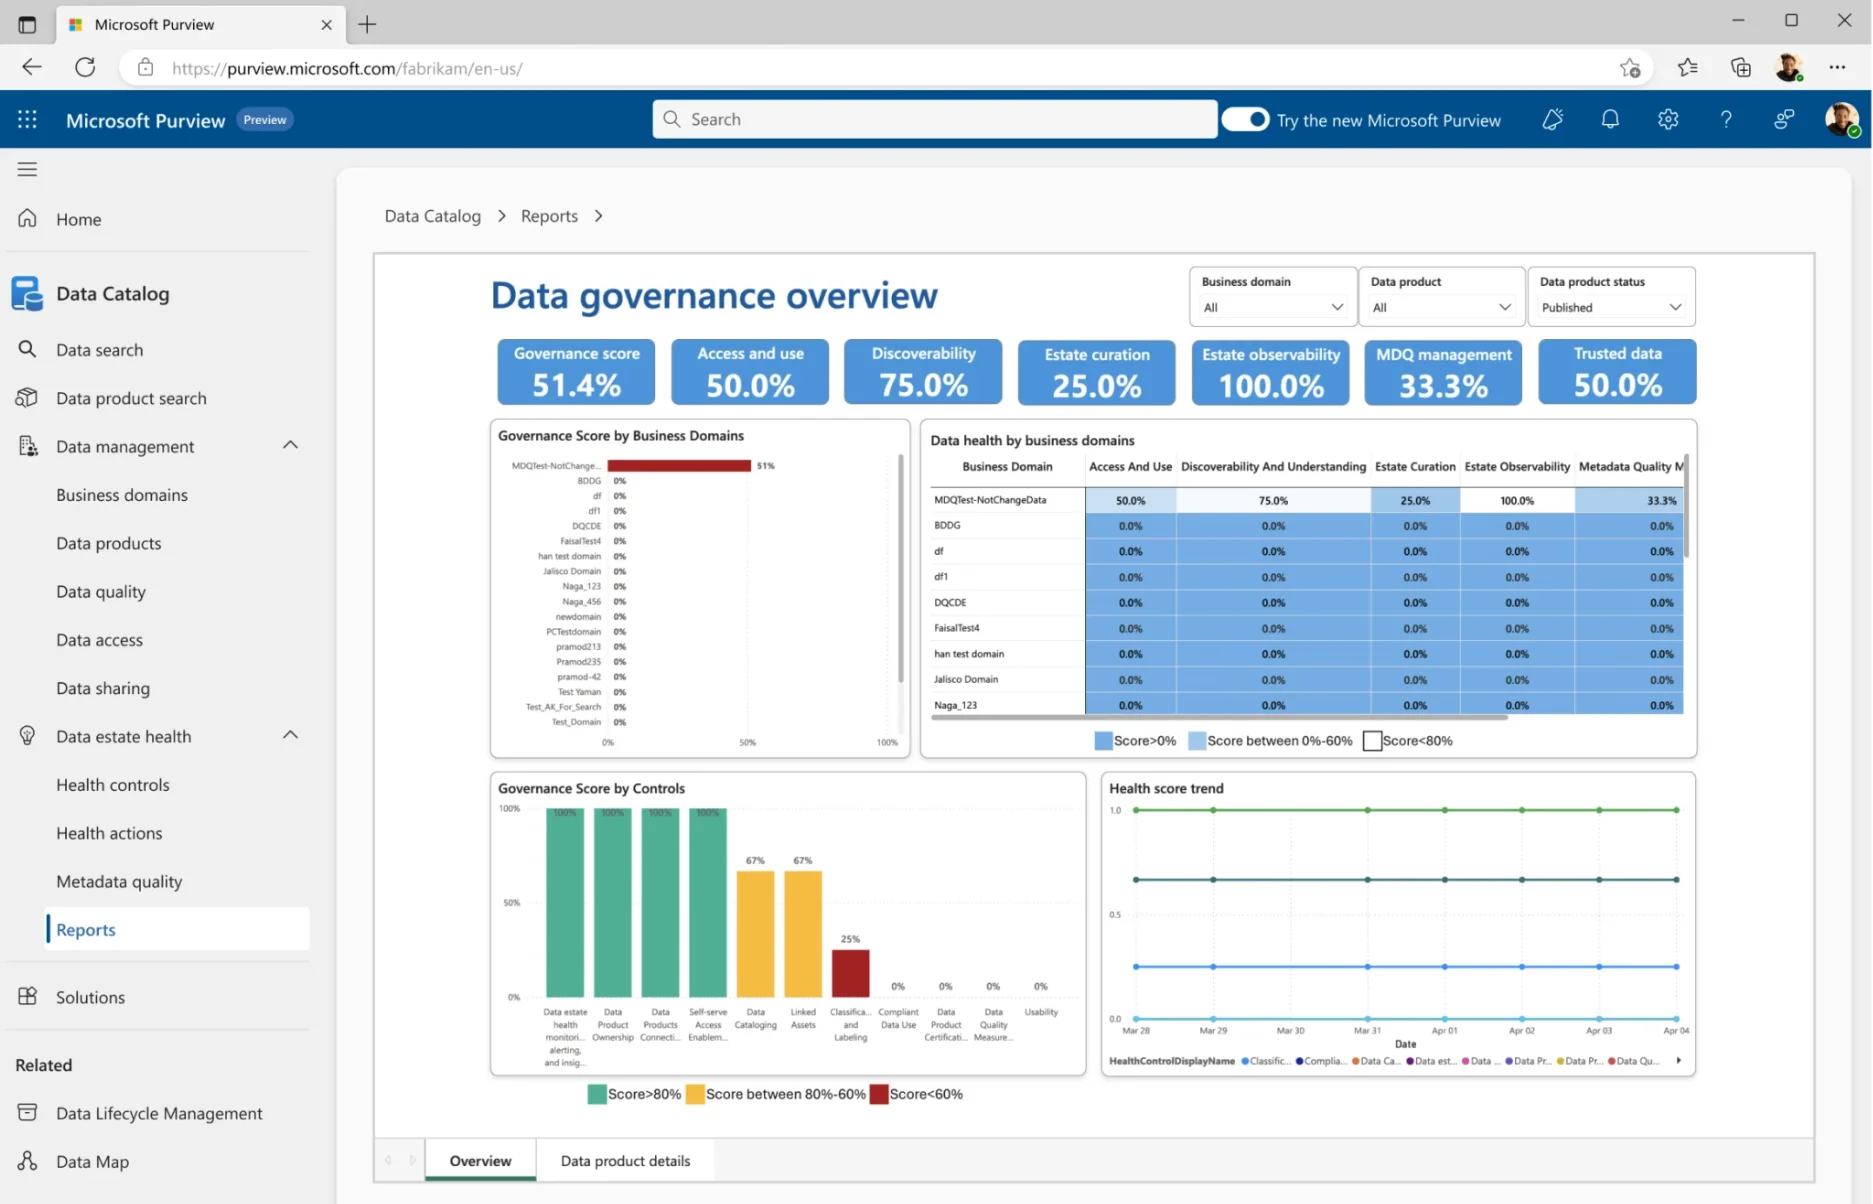 A sample data governance report in Microsoft Purview